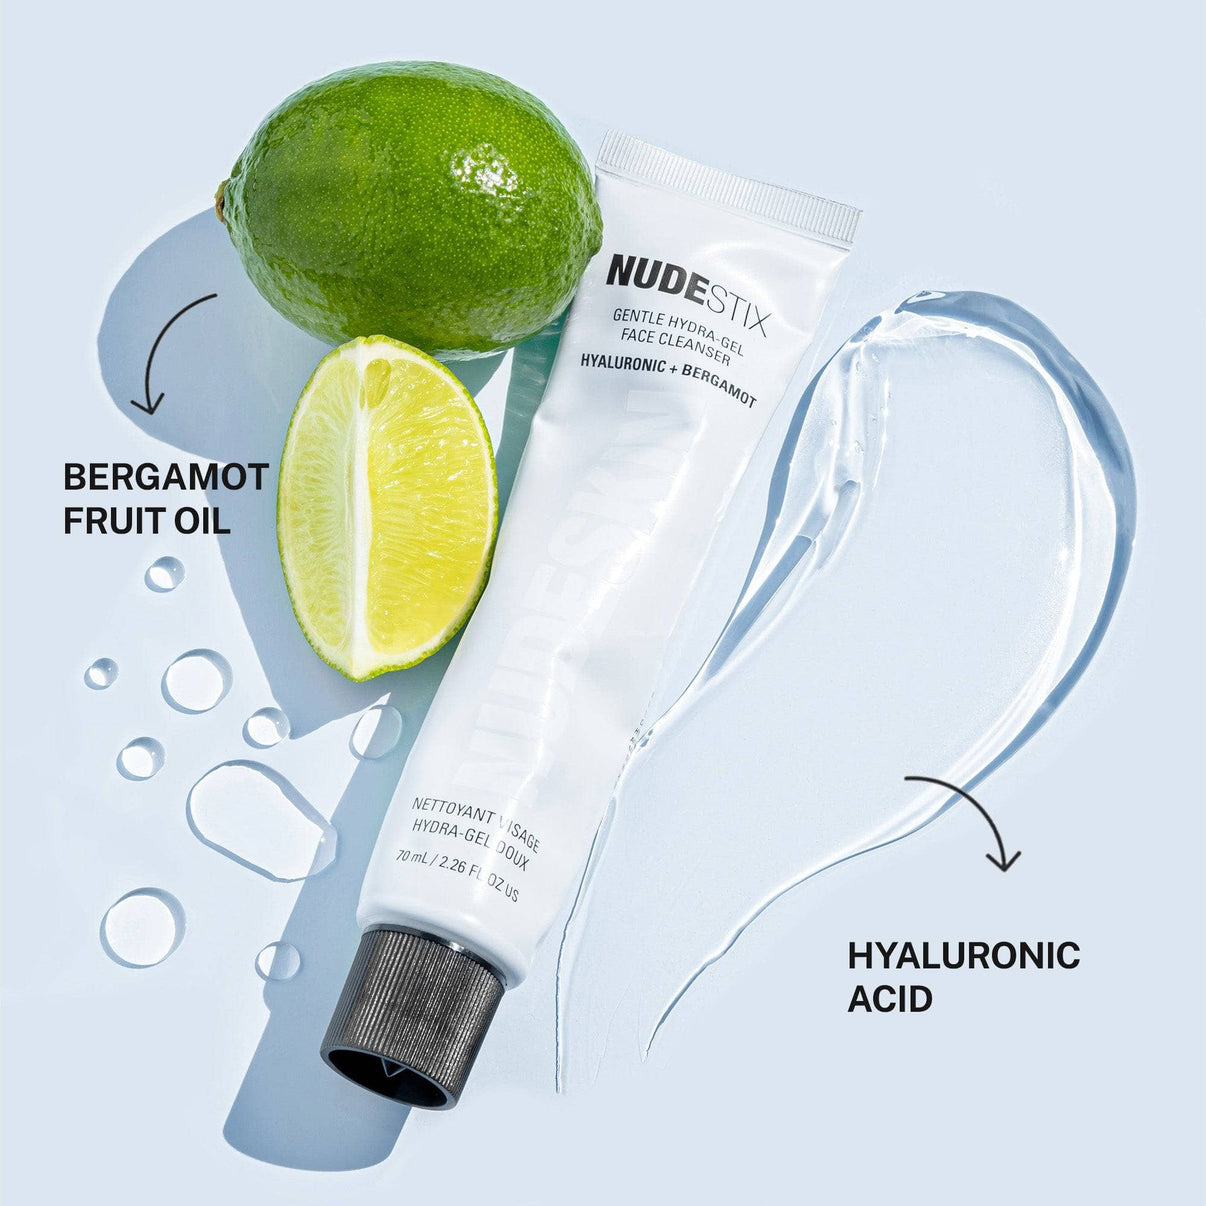 Gentle Hydra-Gel Face Cleanser with bergamot fruit oil and hyaluronic acid